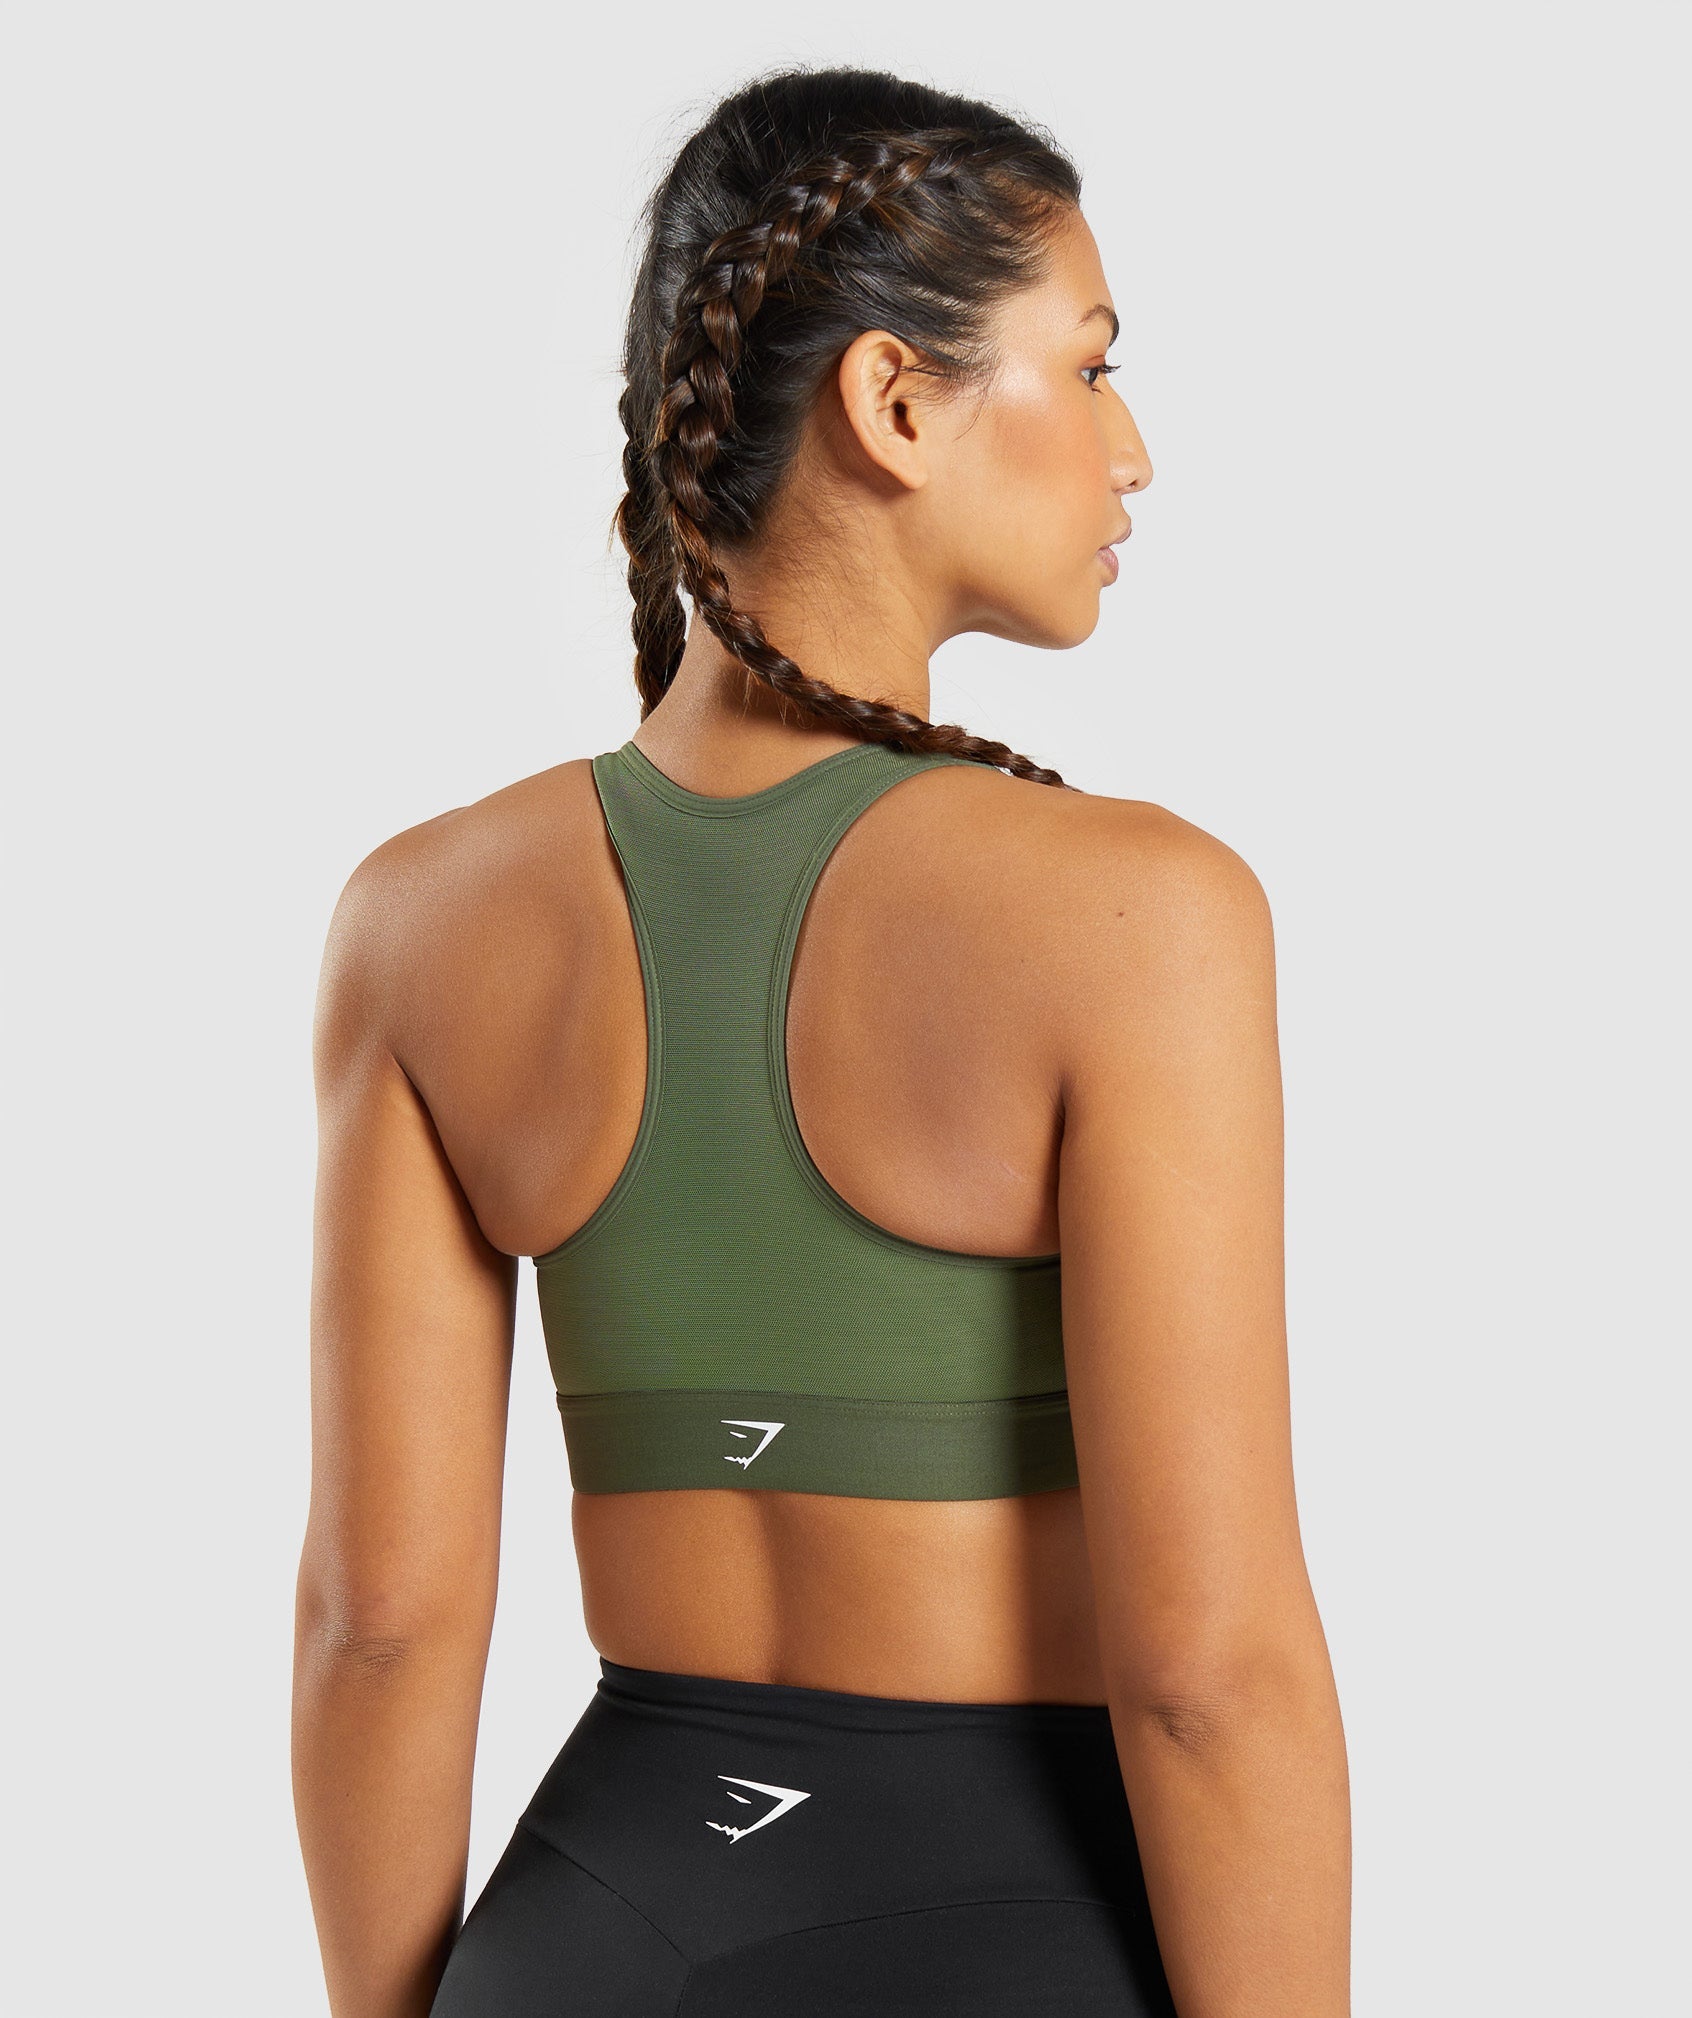 Gymshark Lightweight High Support Sports Bra in Core Olive Size